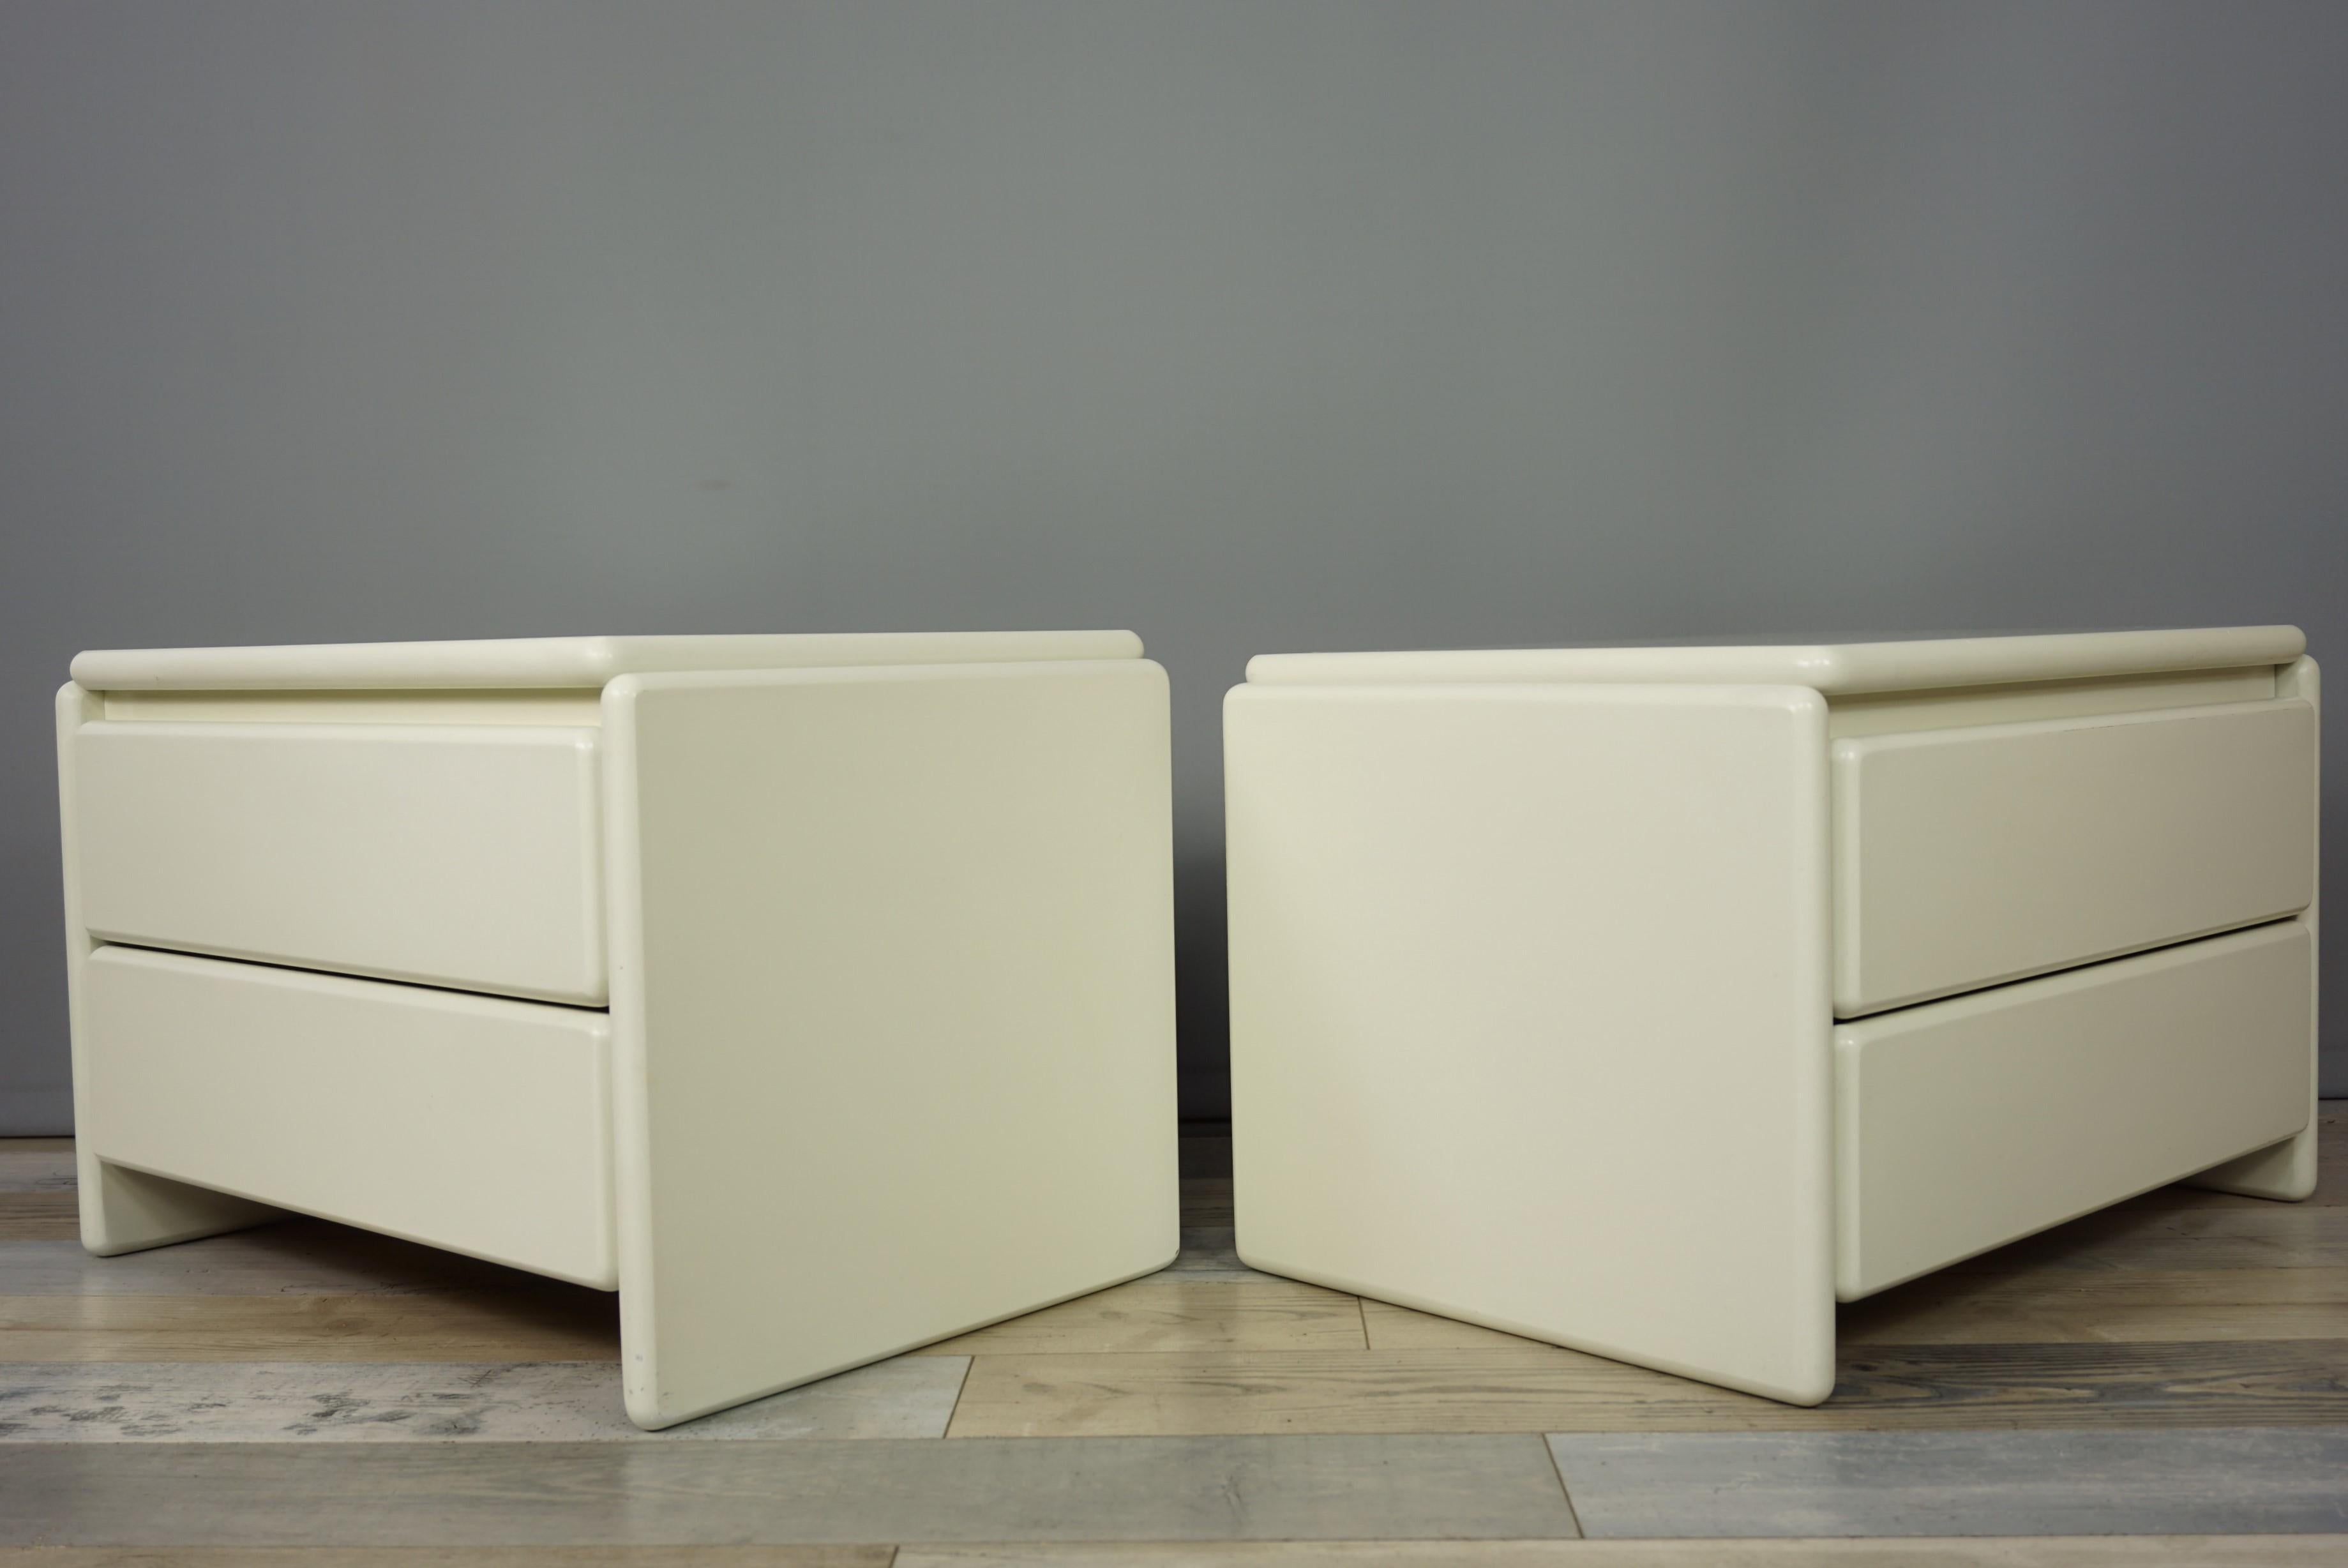 20th Century Pair of White Lacquered Wooden Bedside Tables